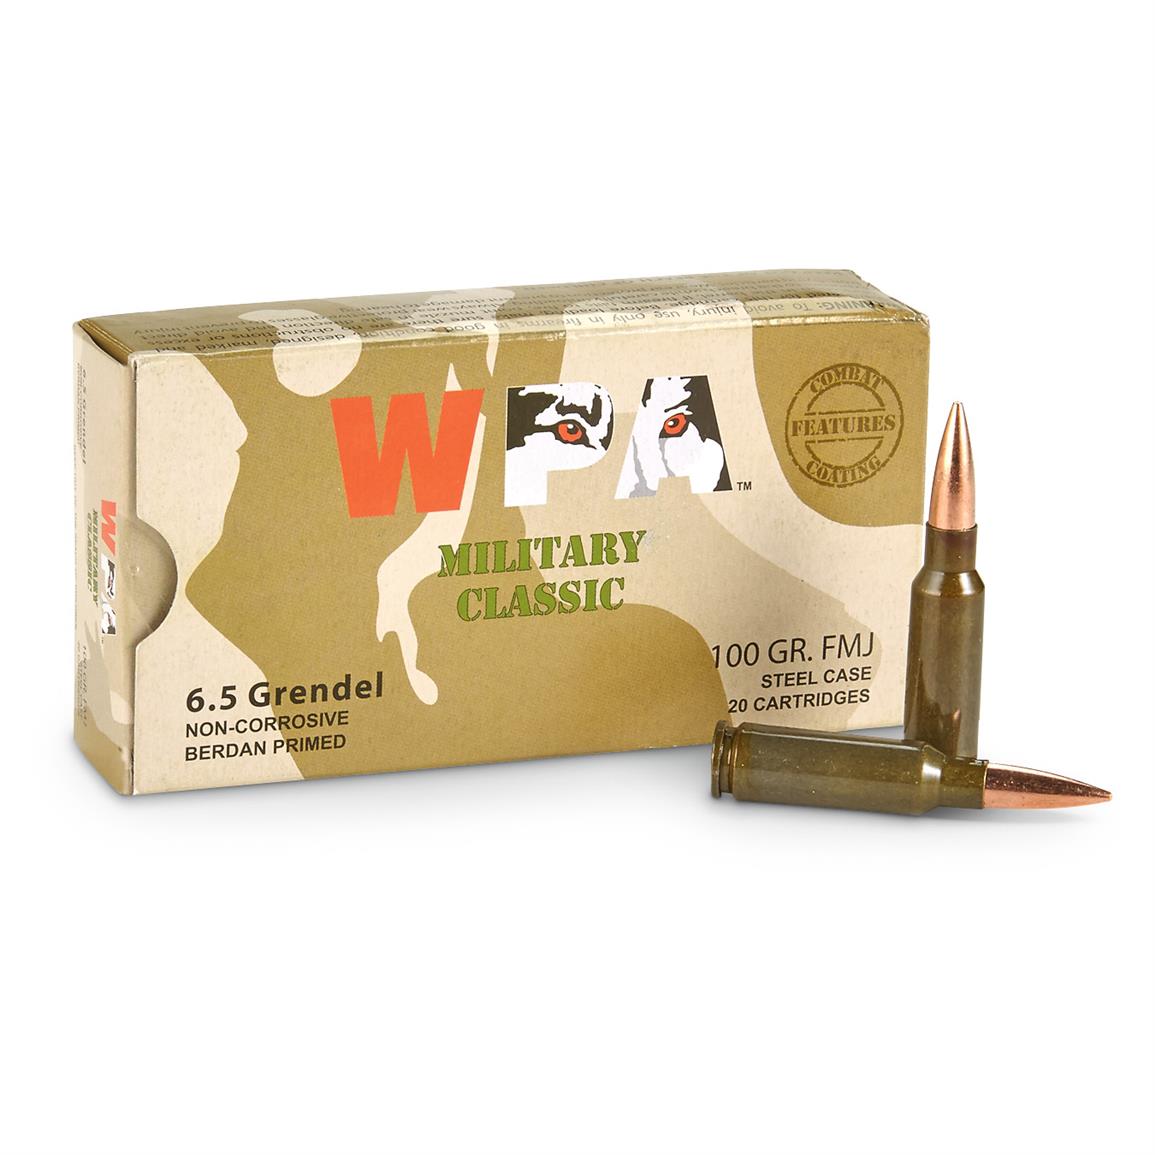 Wolf Military Classic, 6.5 Grendel, FMJ, 100 Grain, 240 Rounds